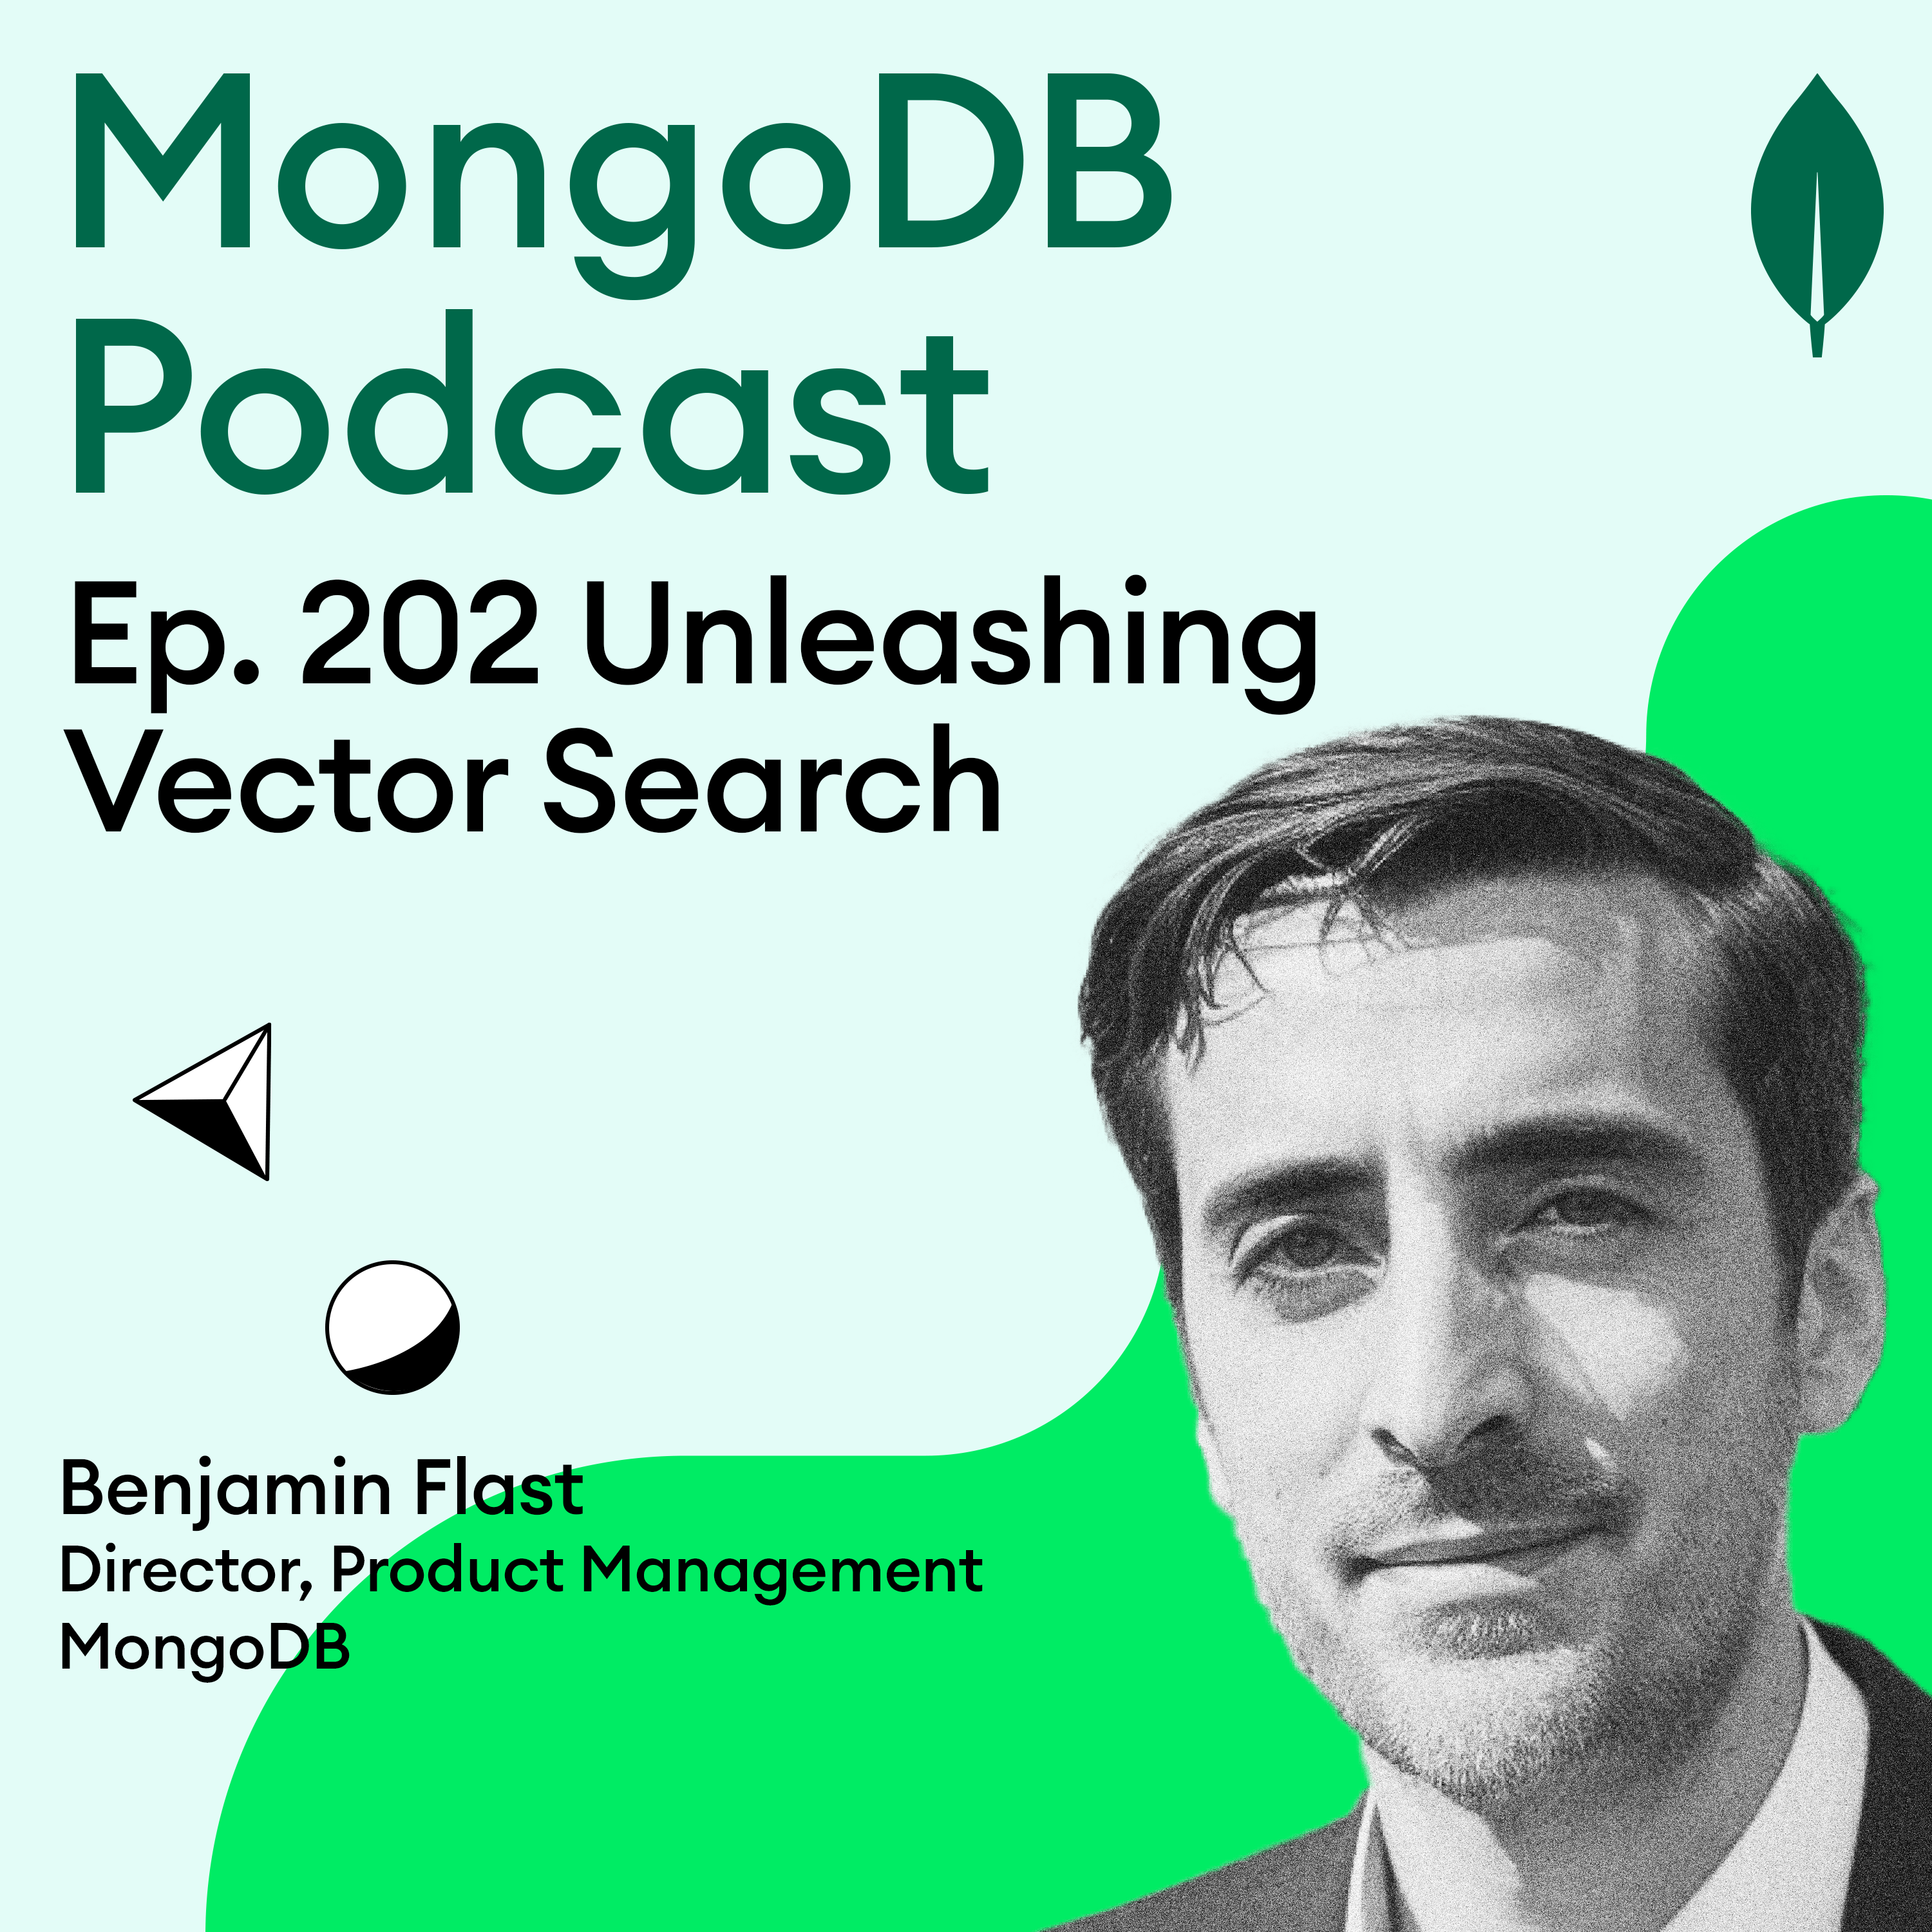 Ep. 202 Unleashing Vector Search: An Exclusive AMA with Benjamin Flast